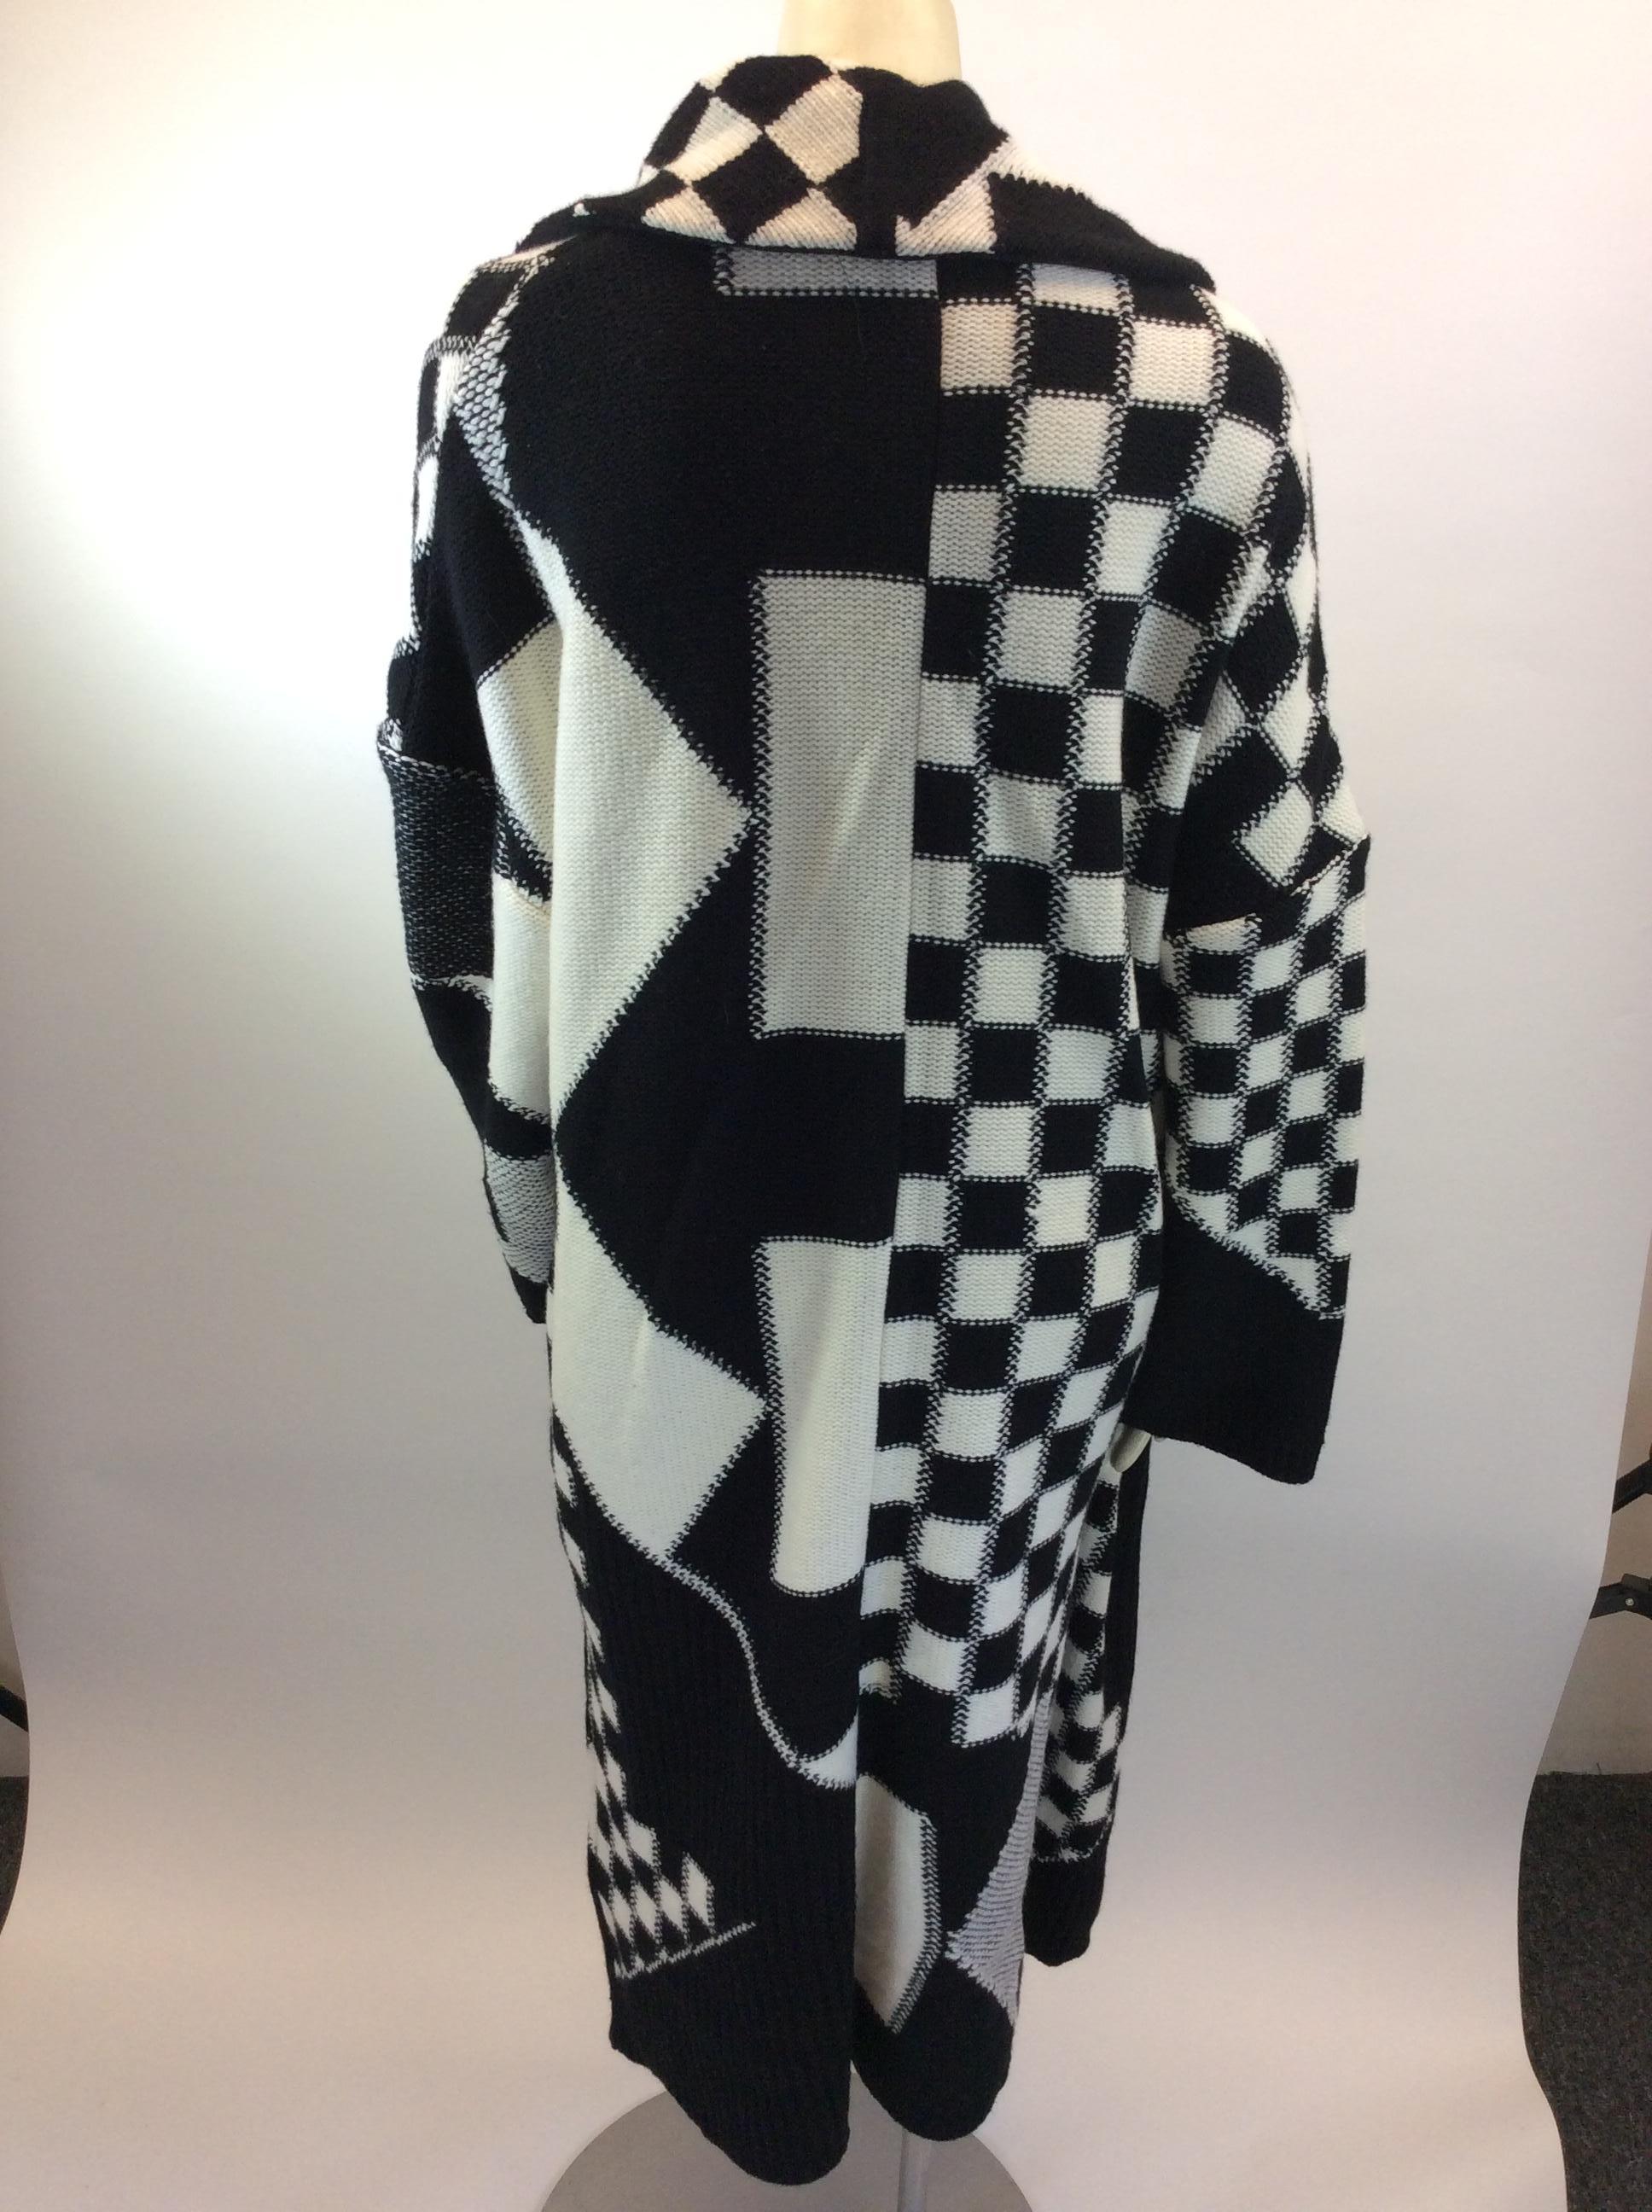 Stella McCartney Black and White Wool Cardigan In Good Condition For Sale In Narberth, PA